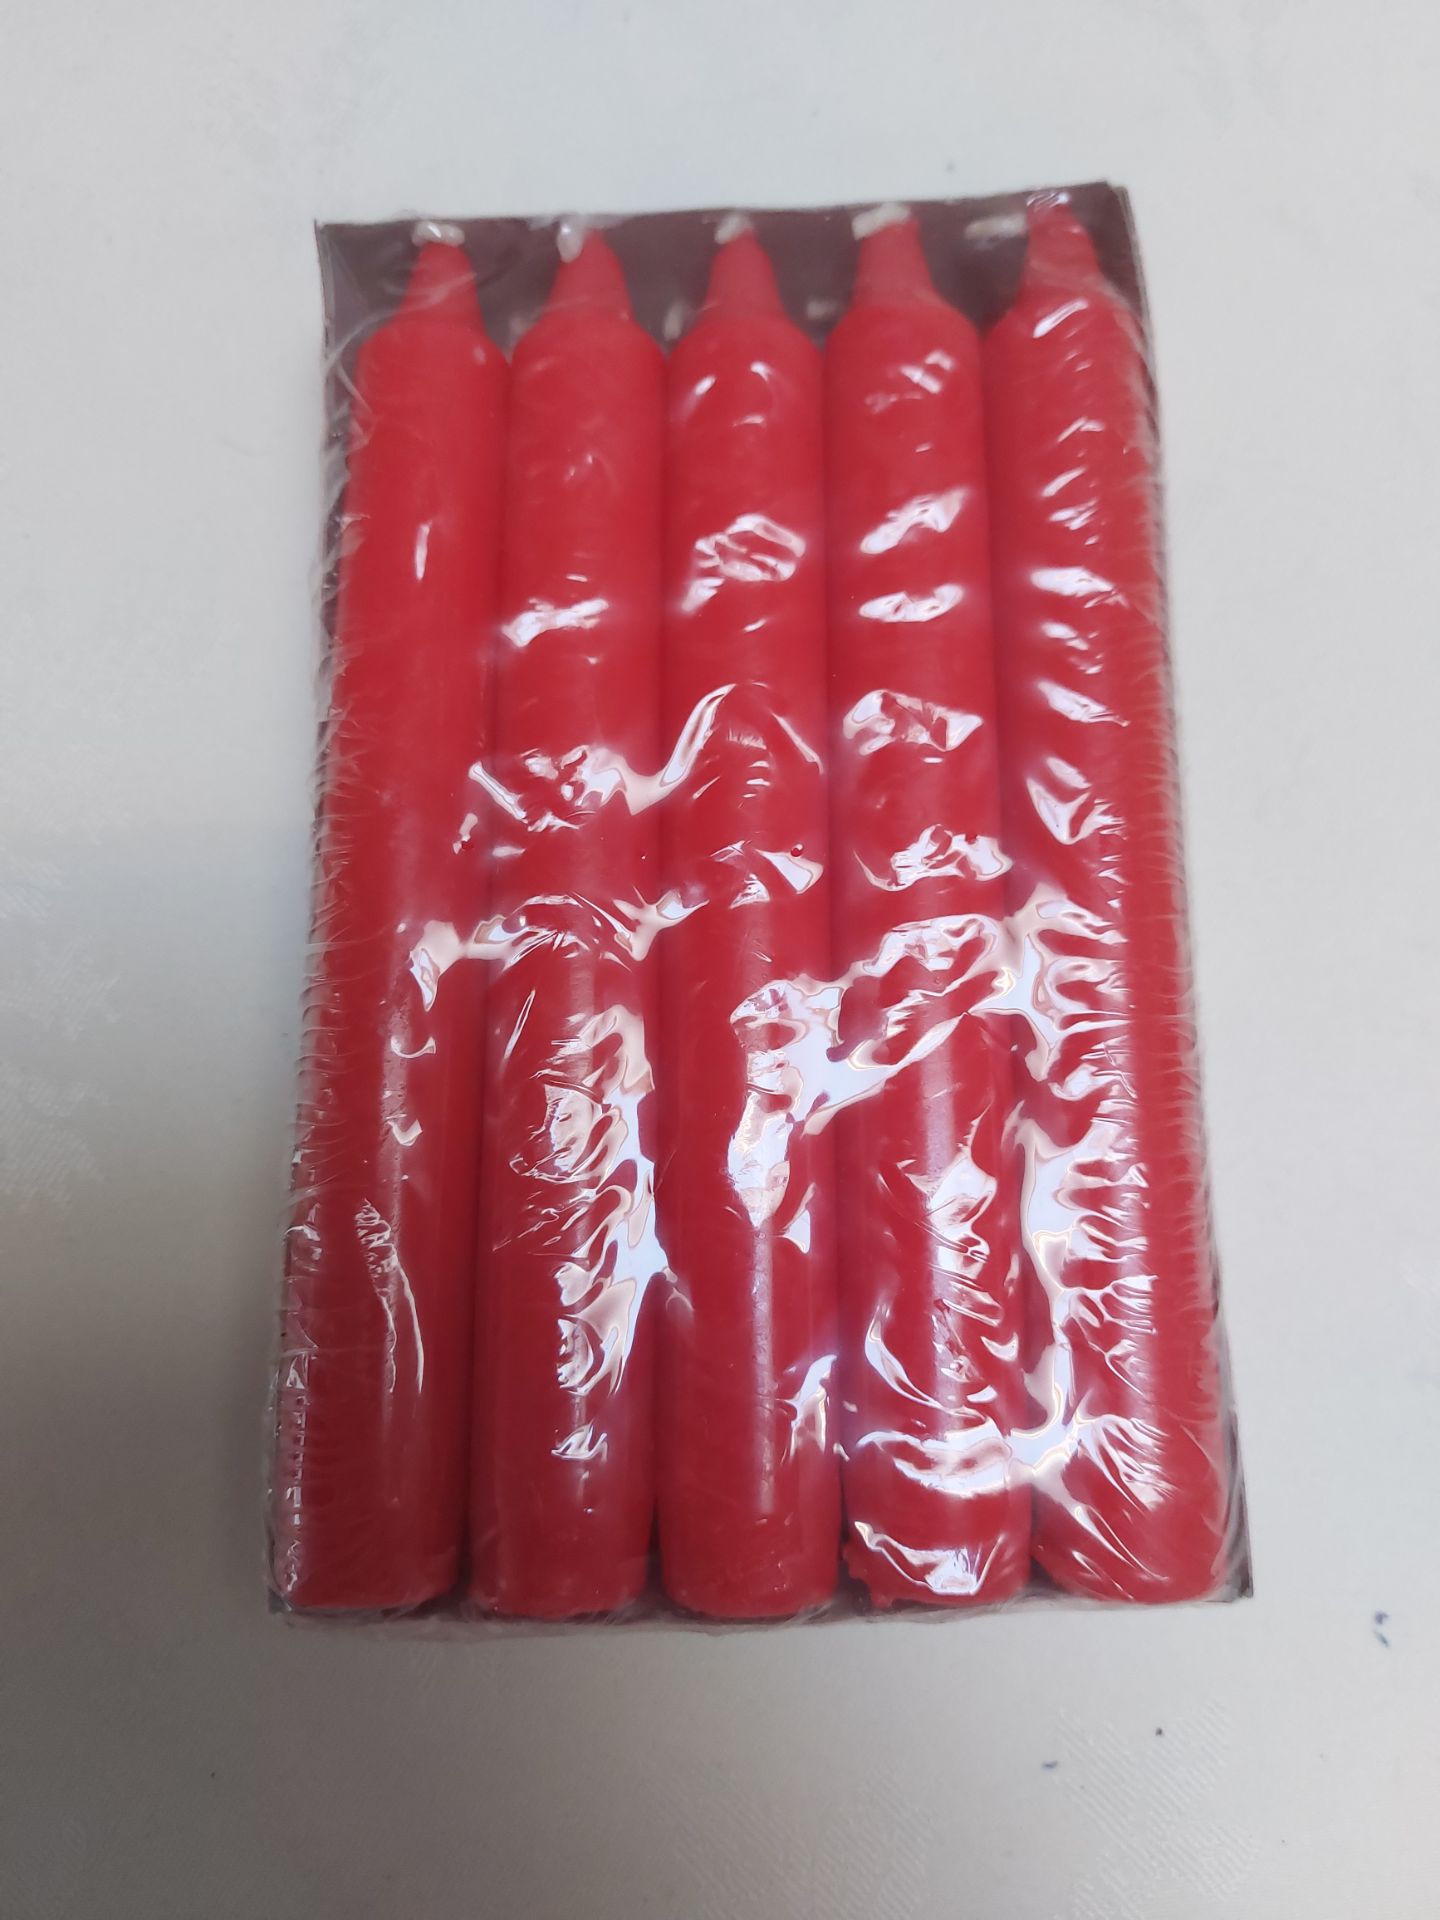 2 Boxes of 10 Red Candles 17.5 cm Long. - Image 2 of 5